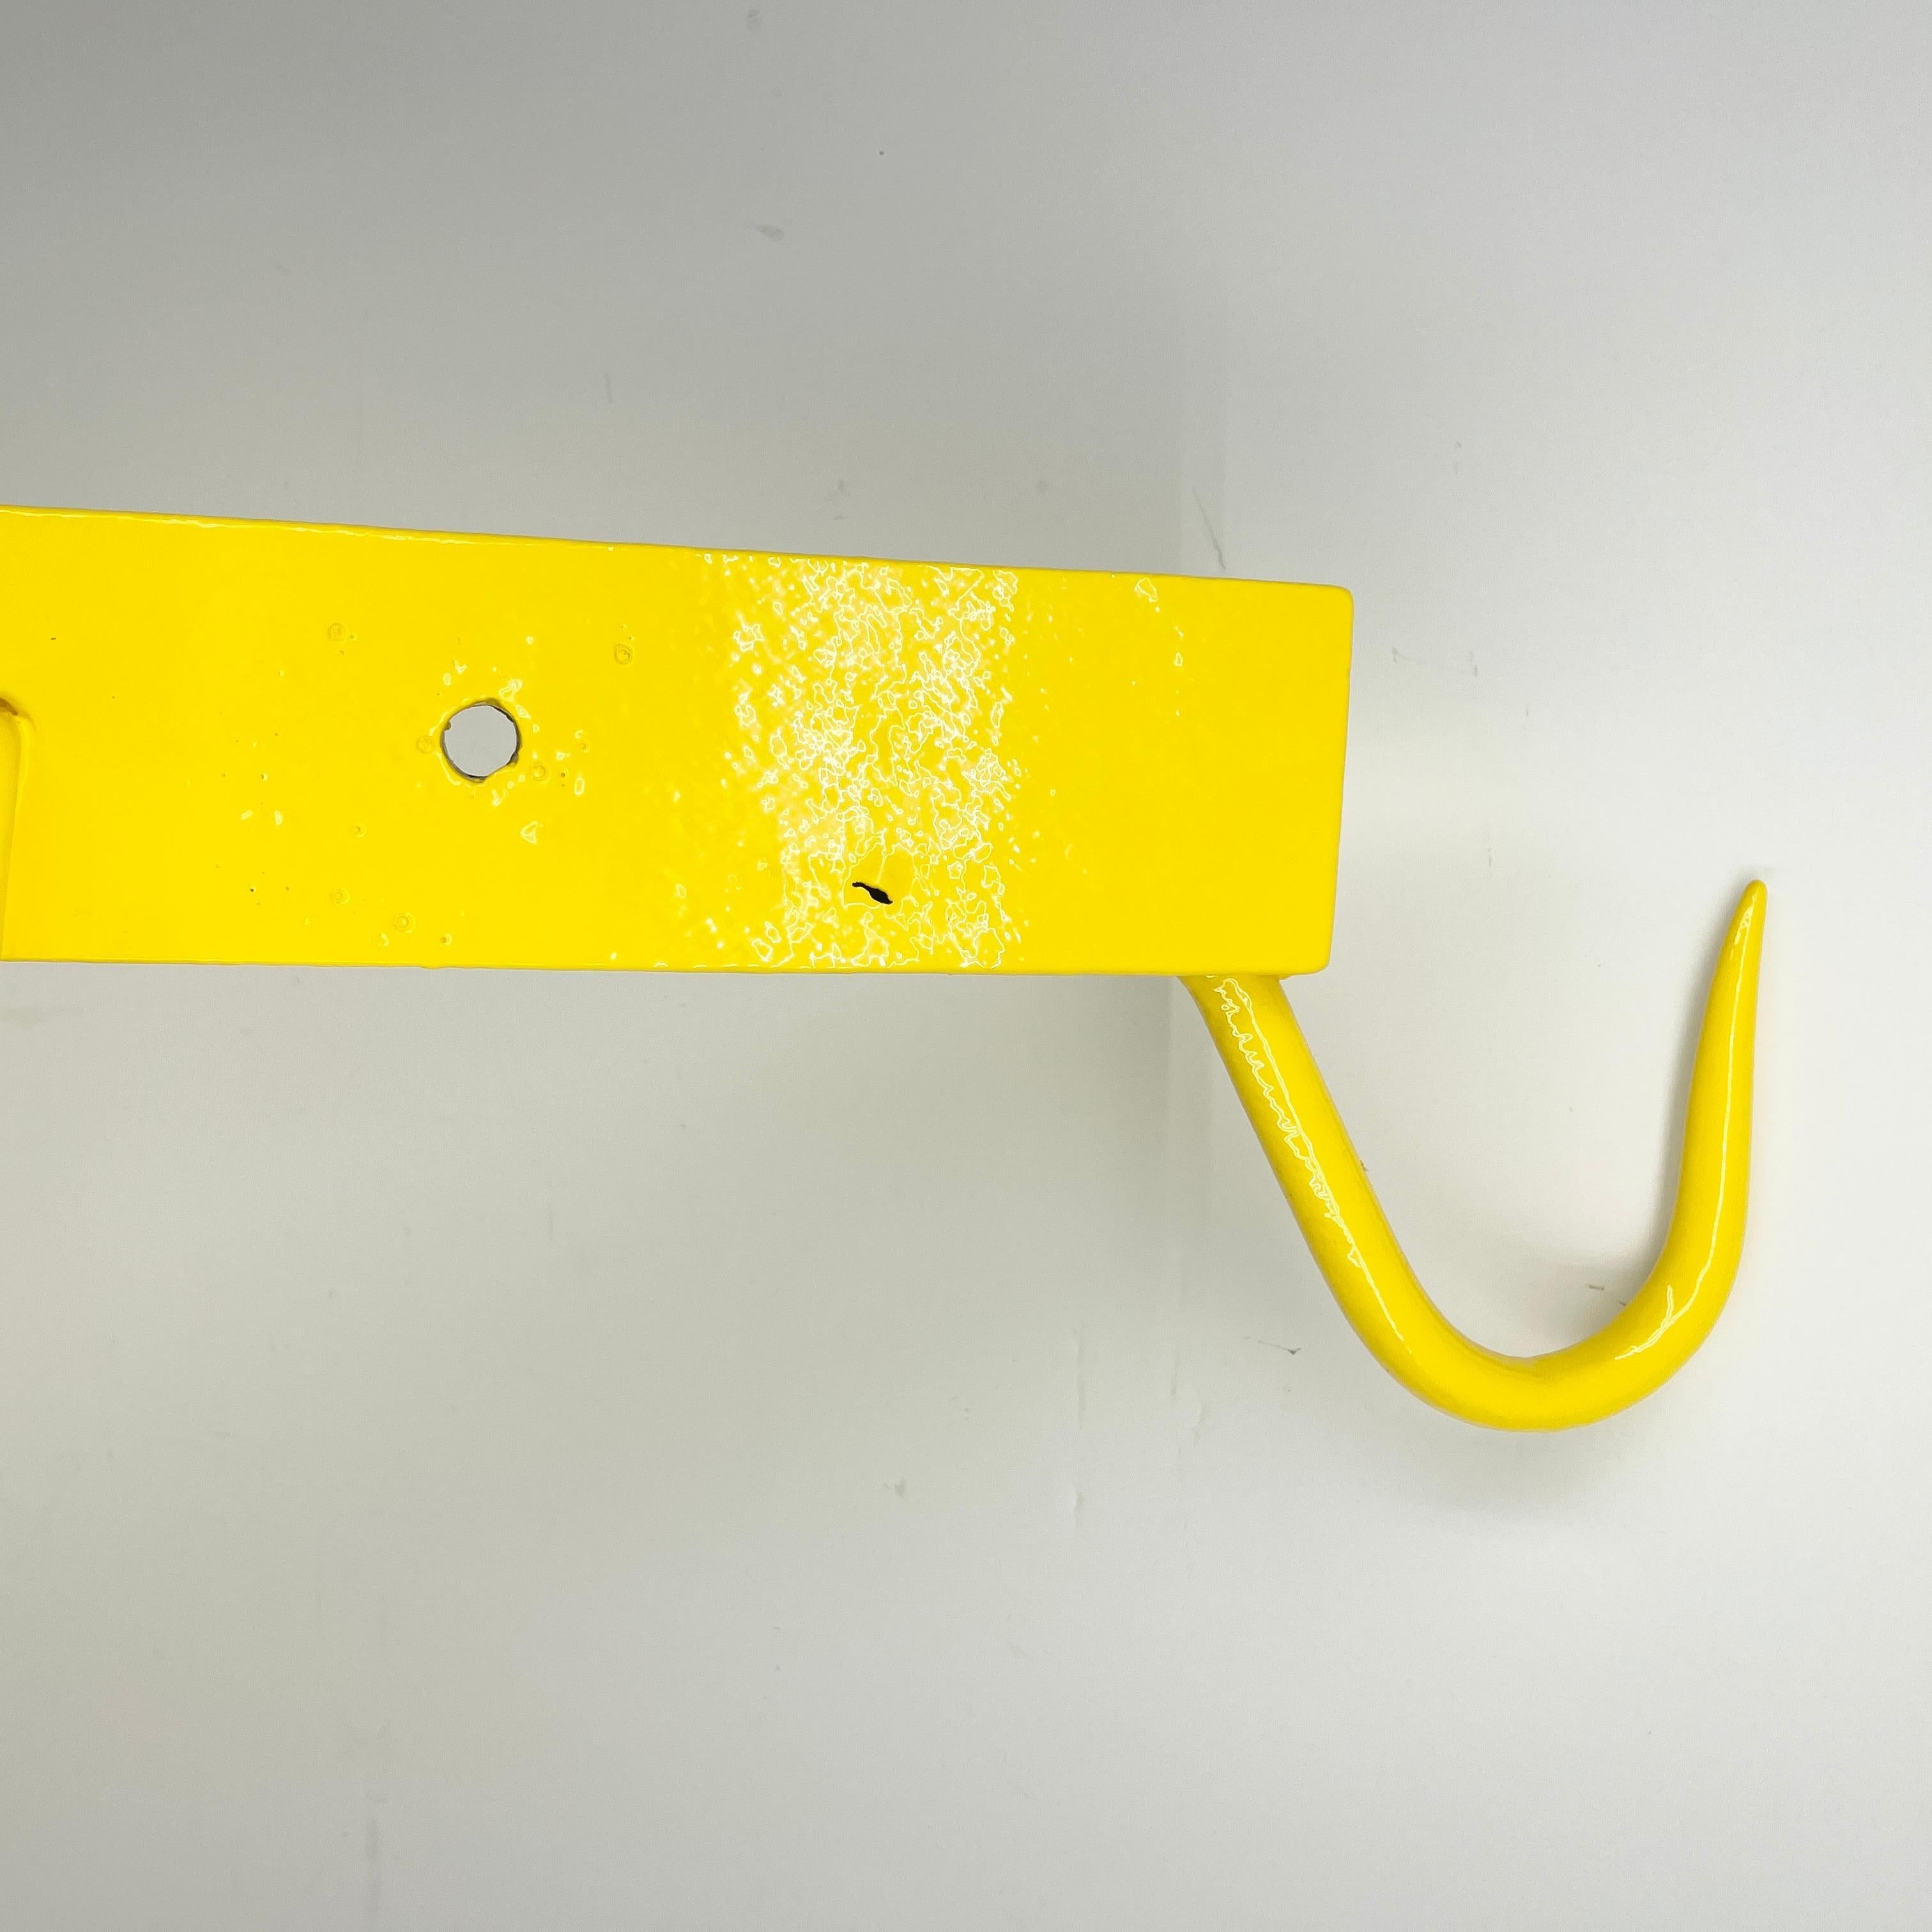 Industrial Size Kitchen Meat Hook in Bright Sunshine Yellow In Good Condition For Sale In Haddonfield, NJ